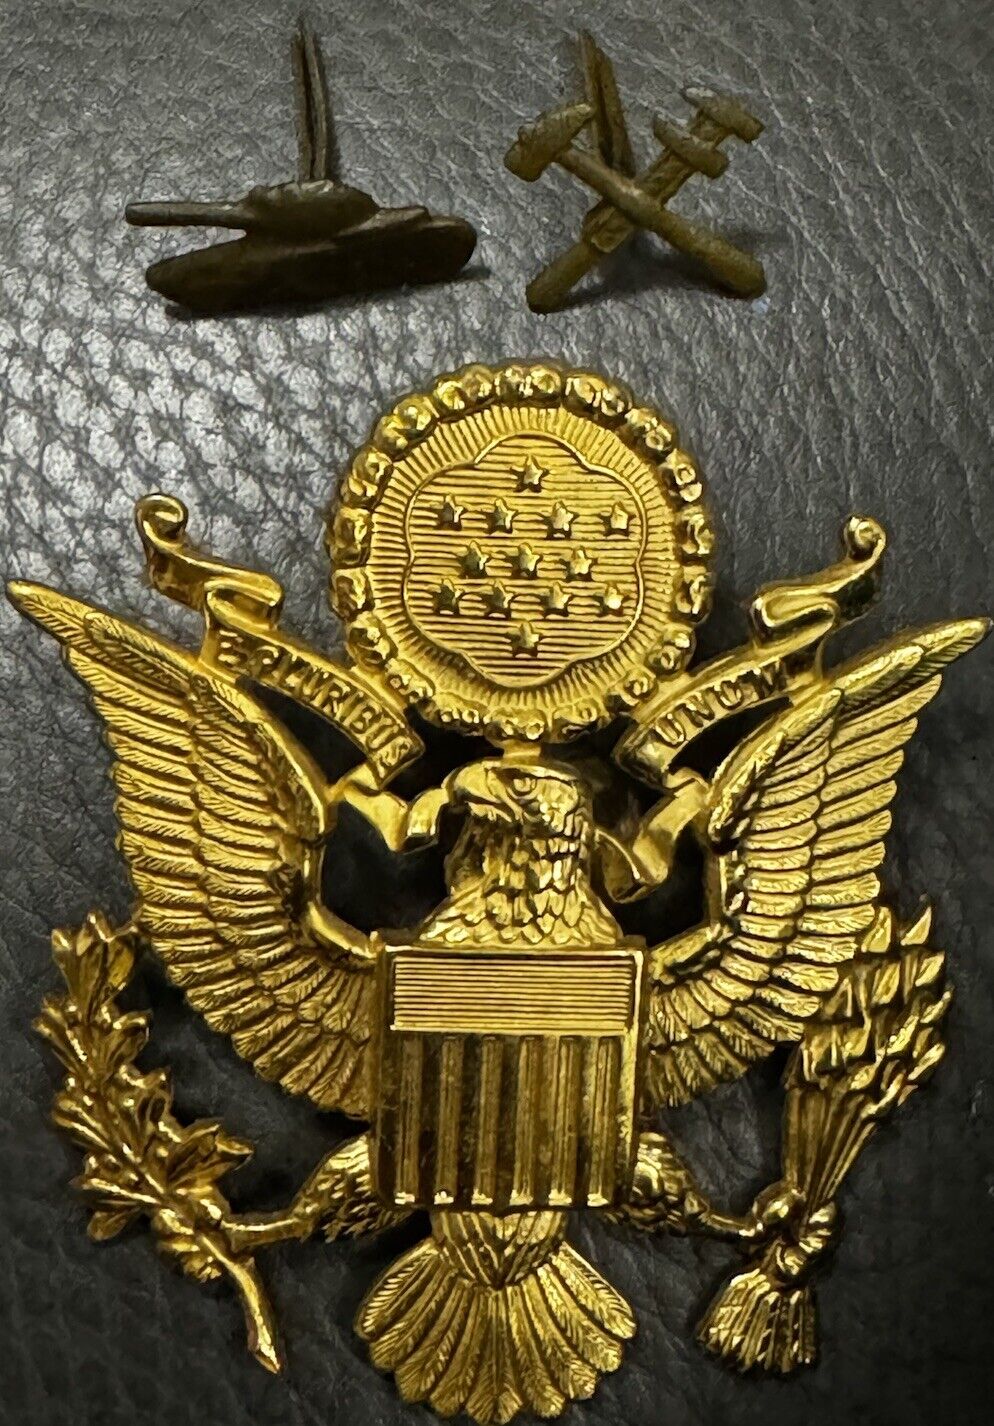 US ARMY Officer Hat EAGLE BADGE Insignia + 2 Steel Pronged Tank & Hammer Wrench